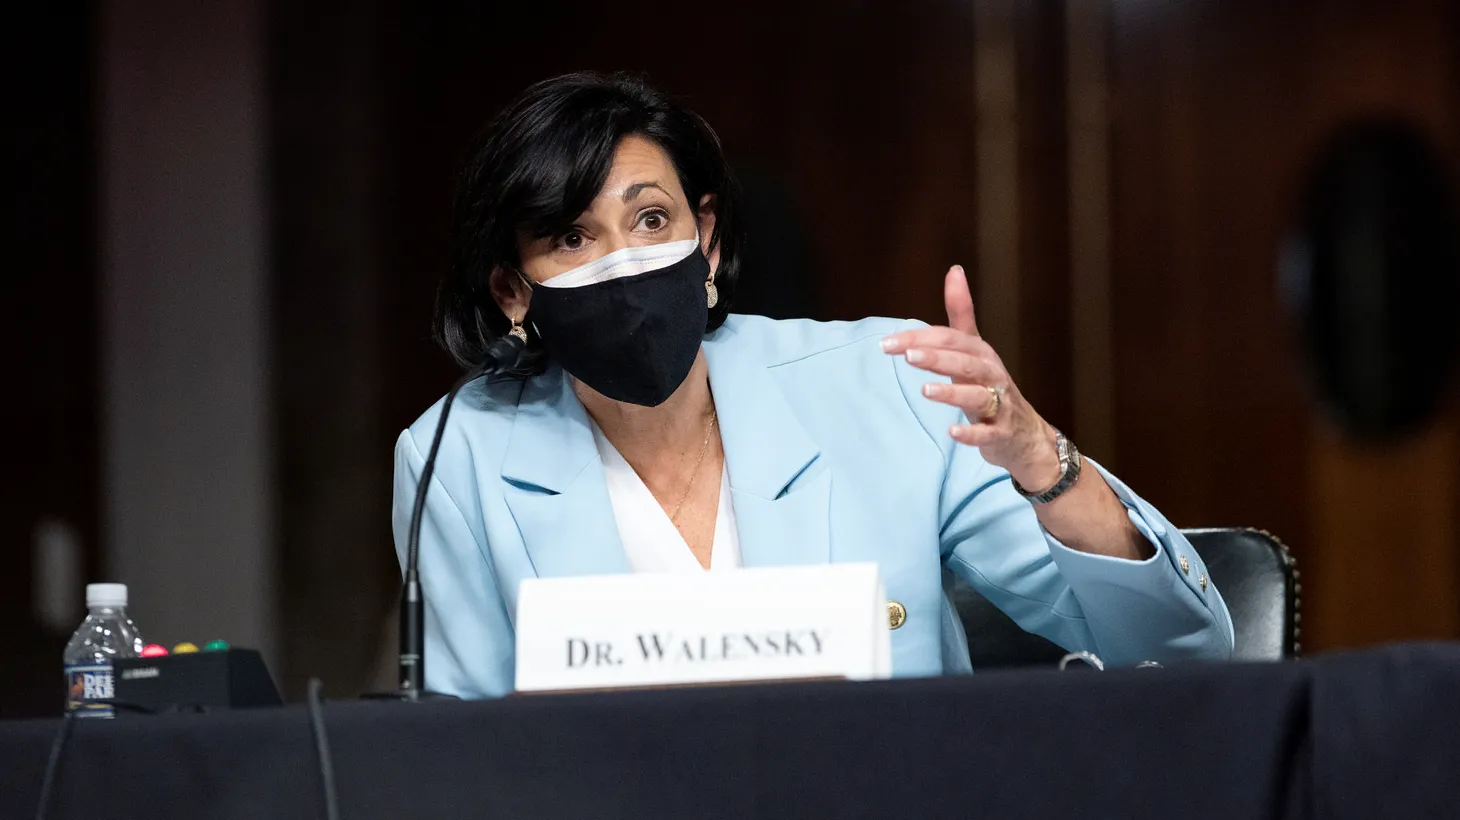 Dr. Rochelle Walensky, director of the Centers for Disease Control and Prevention, answers questions during a Senate hearing on the federal response to COVID-19 at Capitol Hill in Washington, D.C., U.S., January 11, 2022.